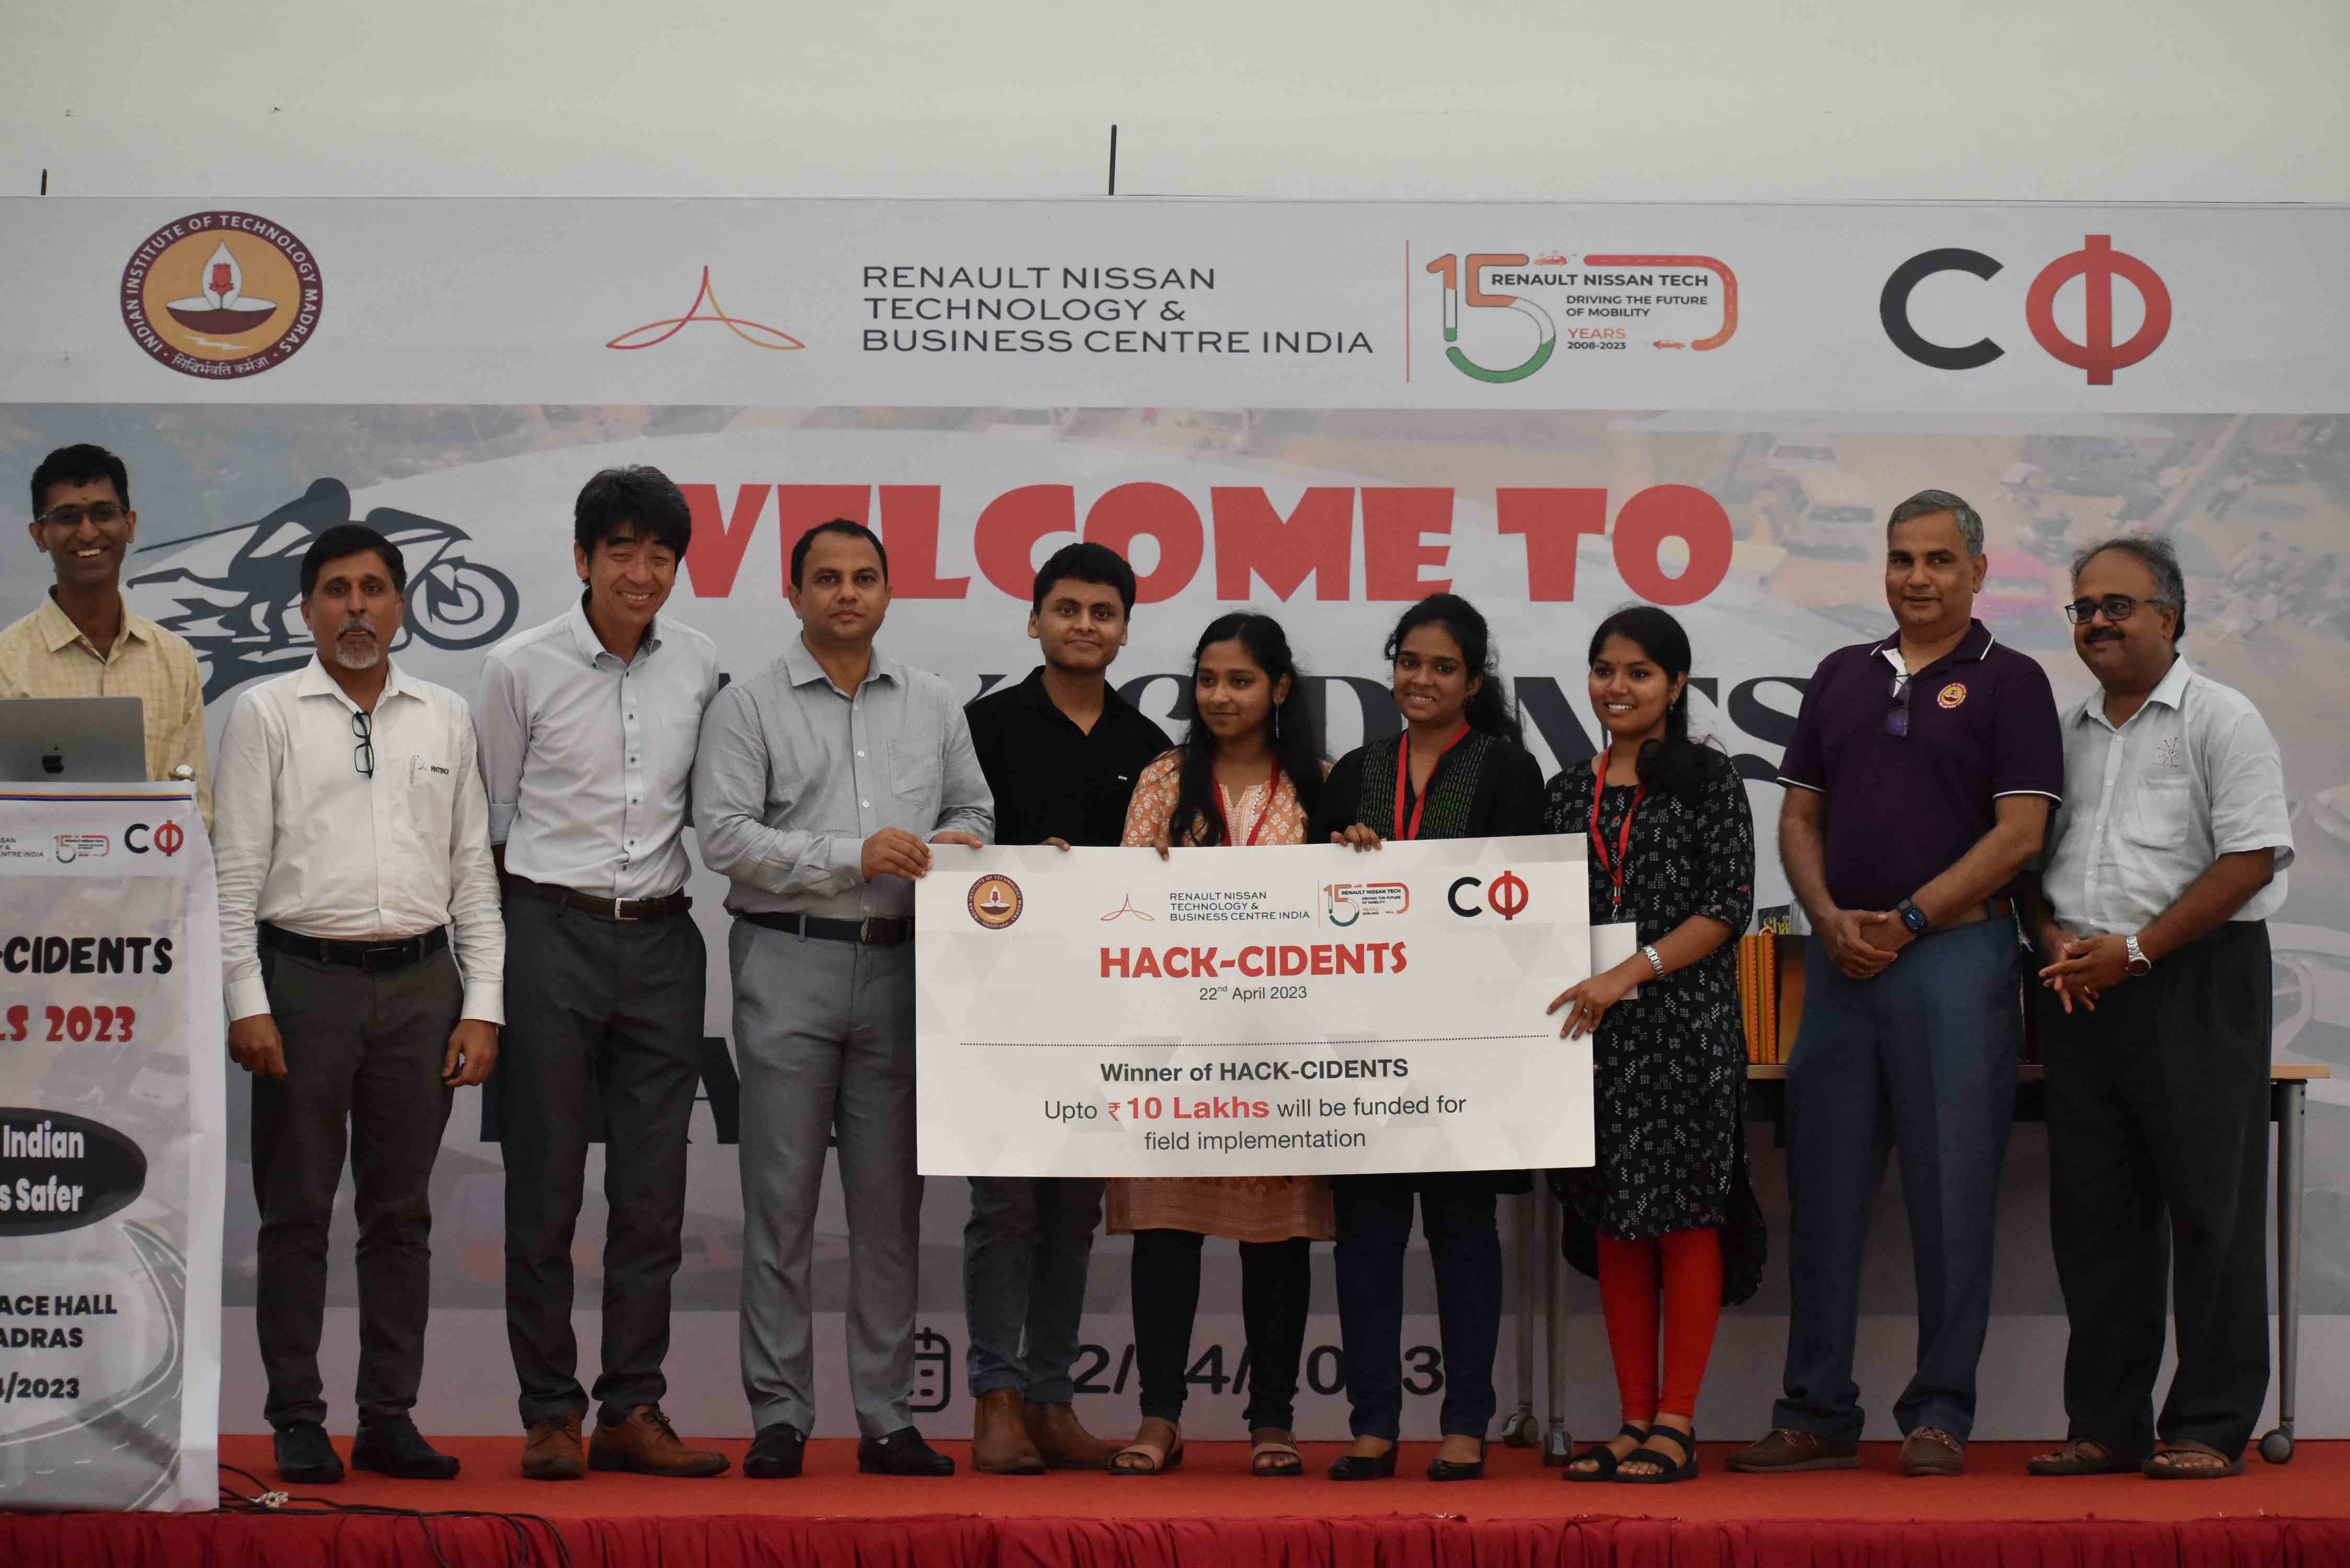 IIT Madras & Renault Nissan Technology & Business Centre India (RNTBCI) organize National Hackathon on Road Safety The goal of this hackathon was to design implementable technology solutions to save lives on Indian roads with teams of college students and young professionals with different skill sets invited to take part